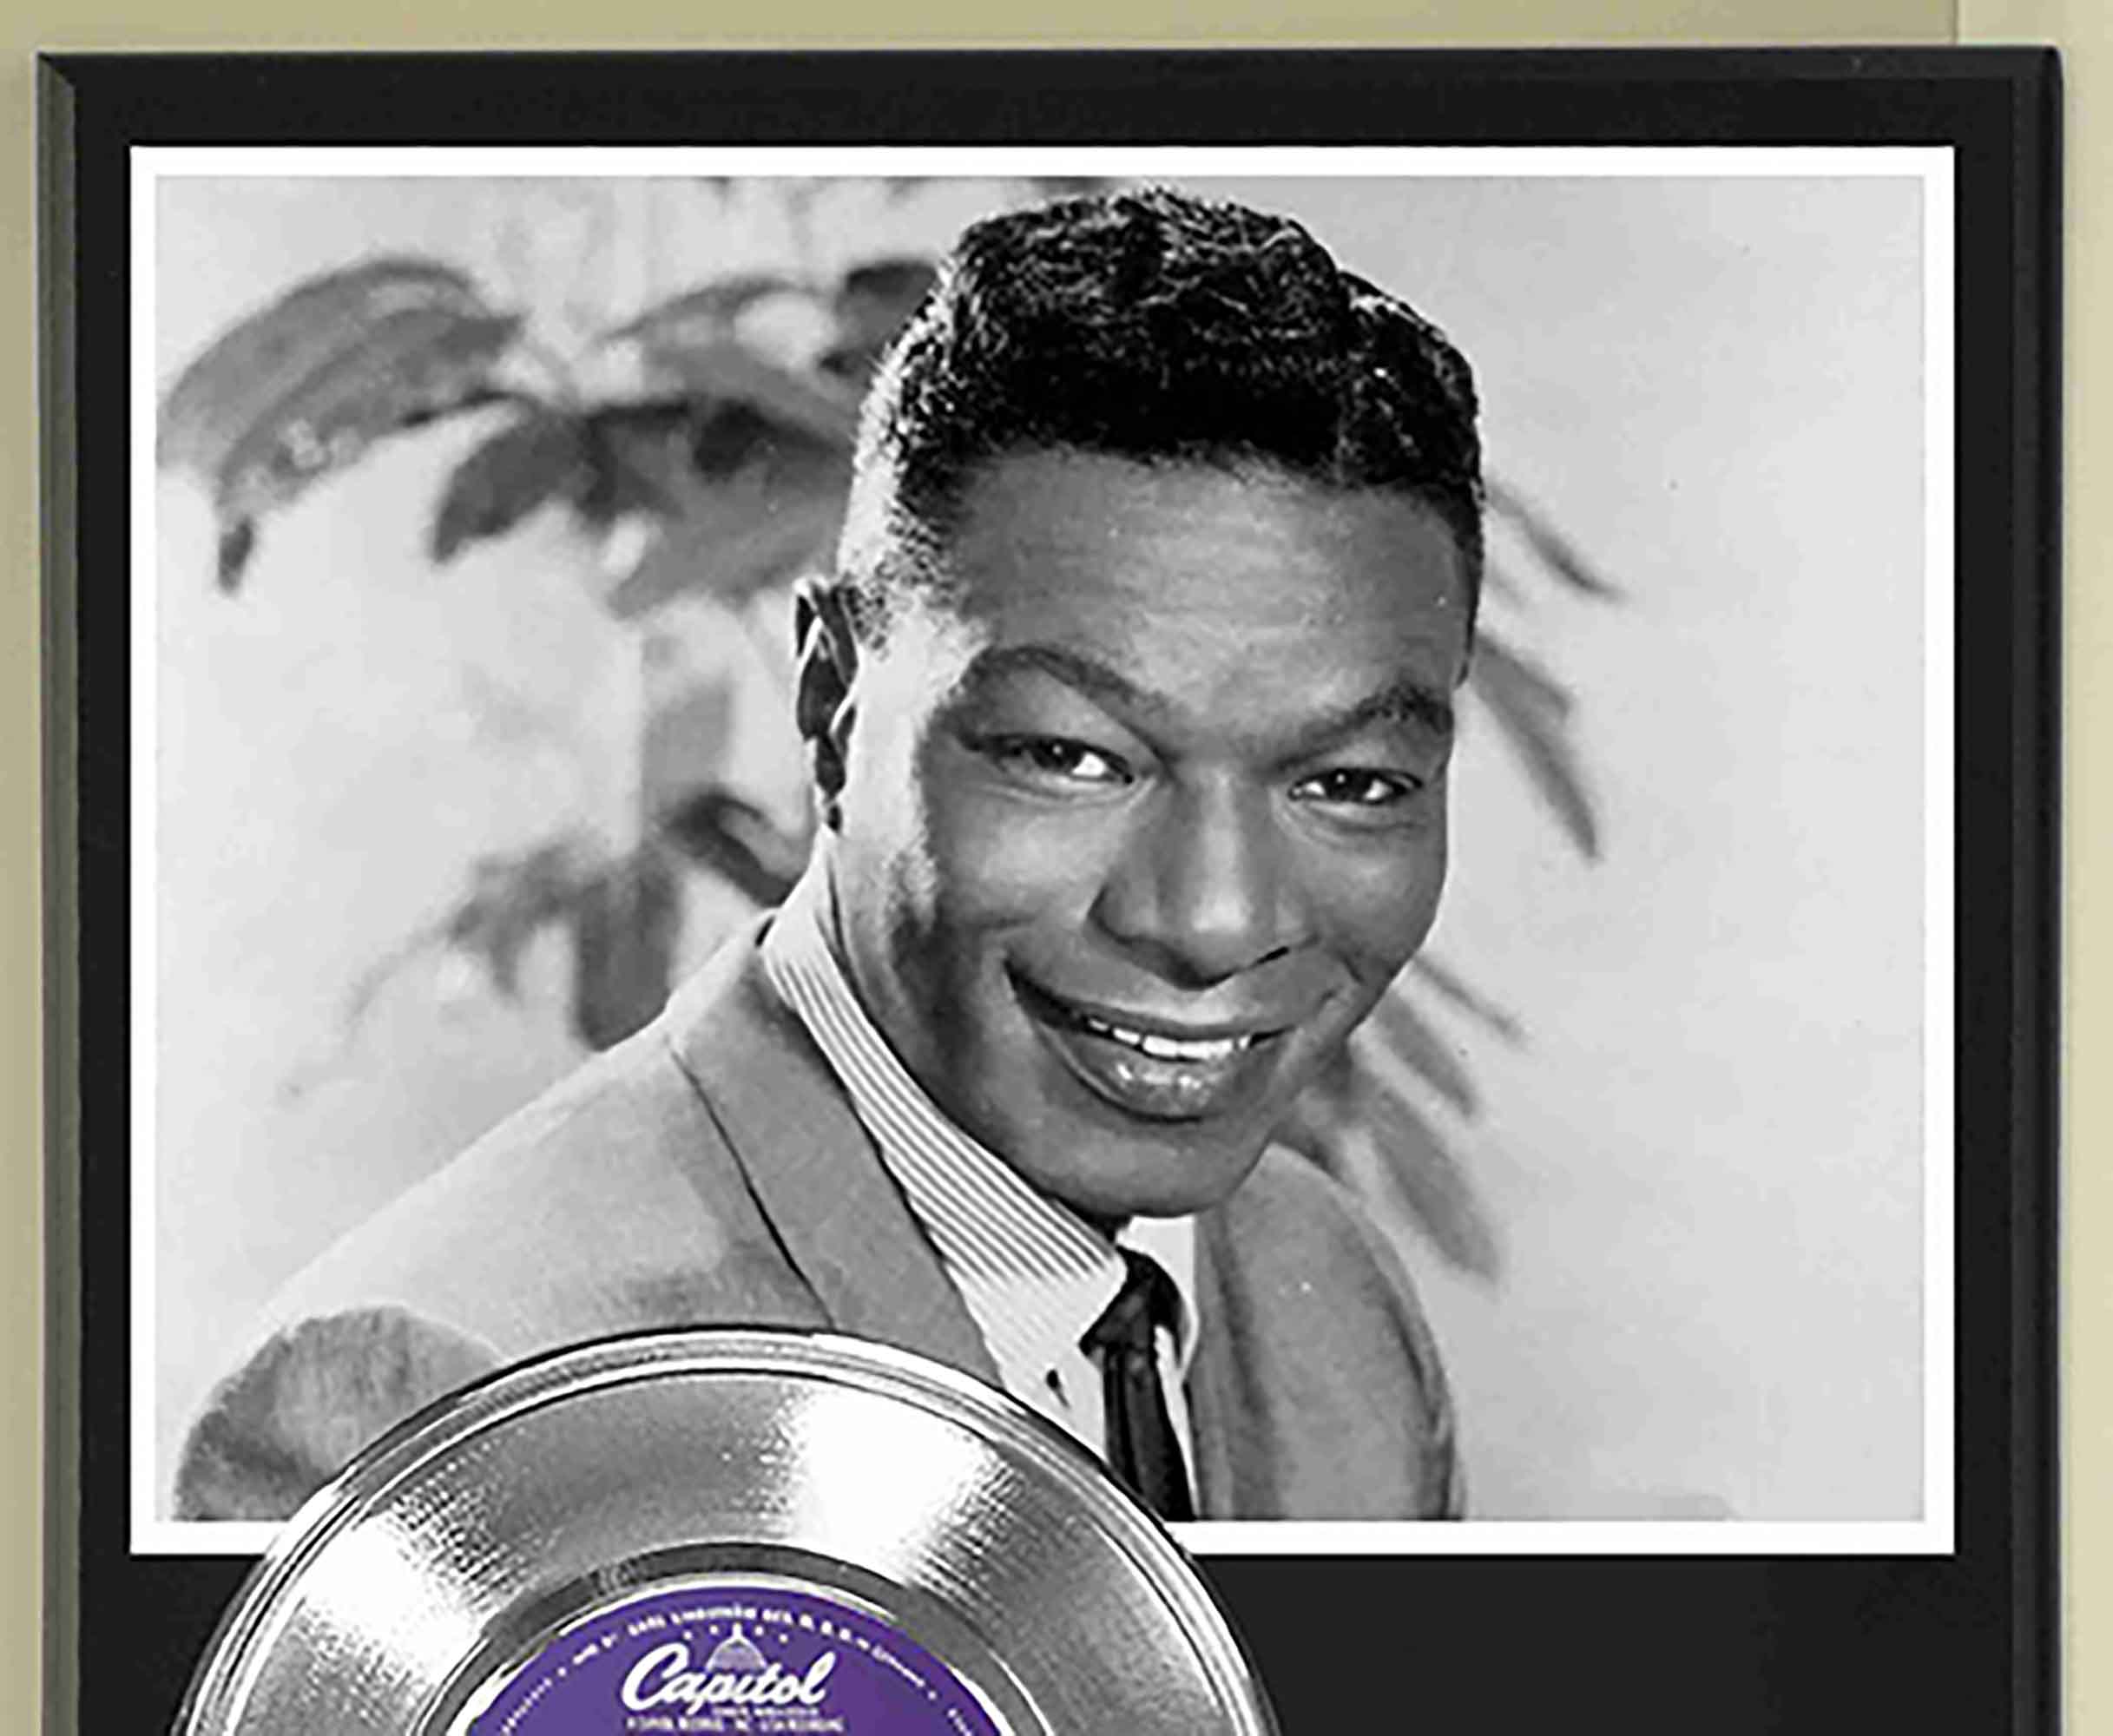 Nat King Cole - When I Fall In Love Platinum 45 Record Ltd Edition Display Award Quality - Gold Record Outlet Album and Disc Collectible Memorabilia